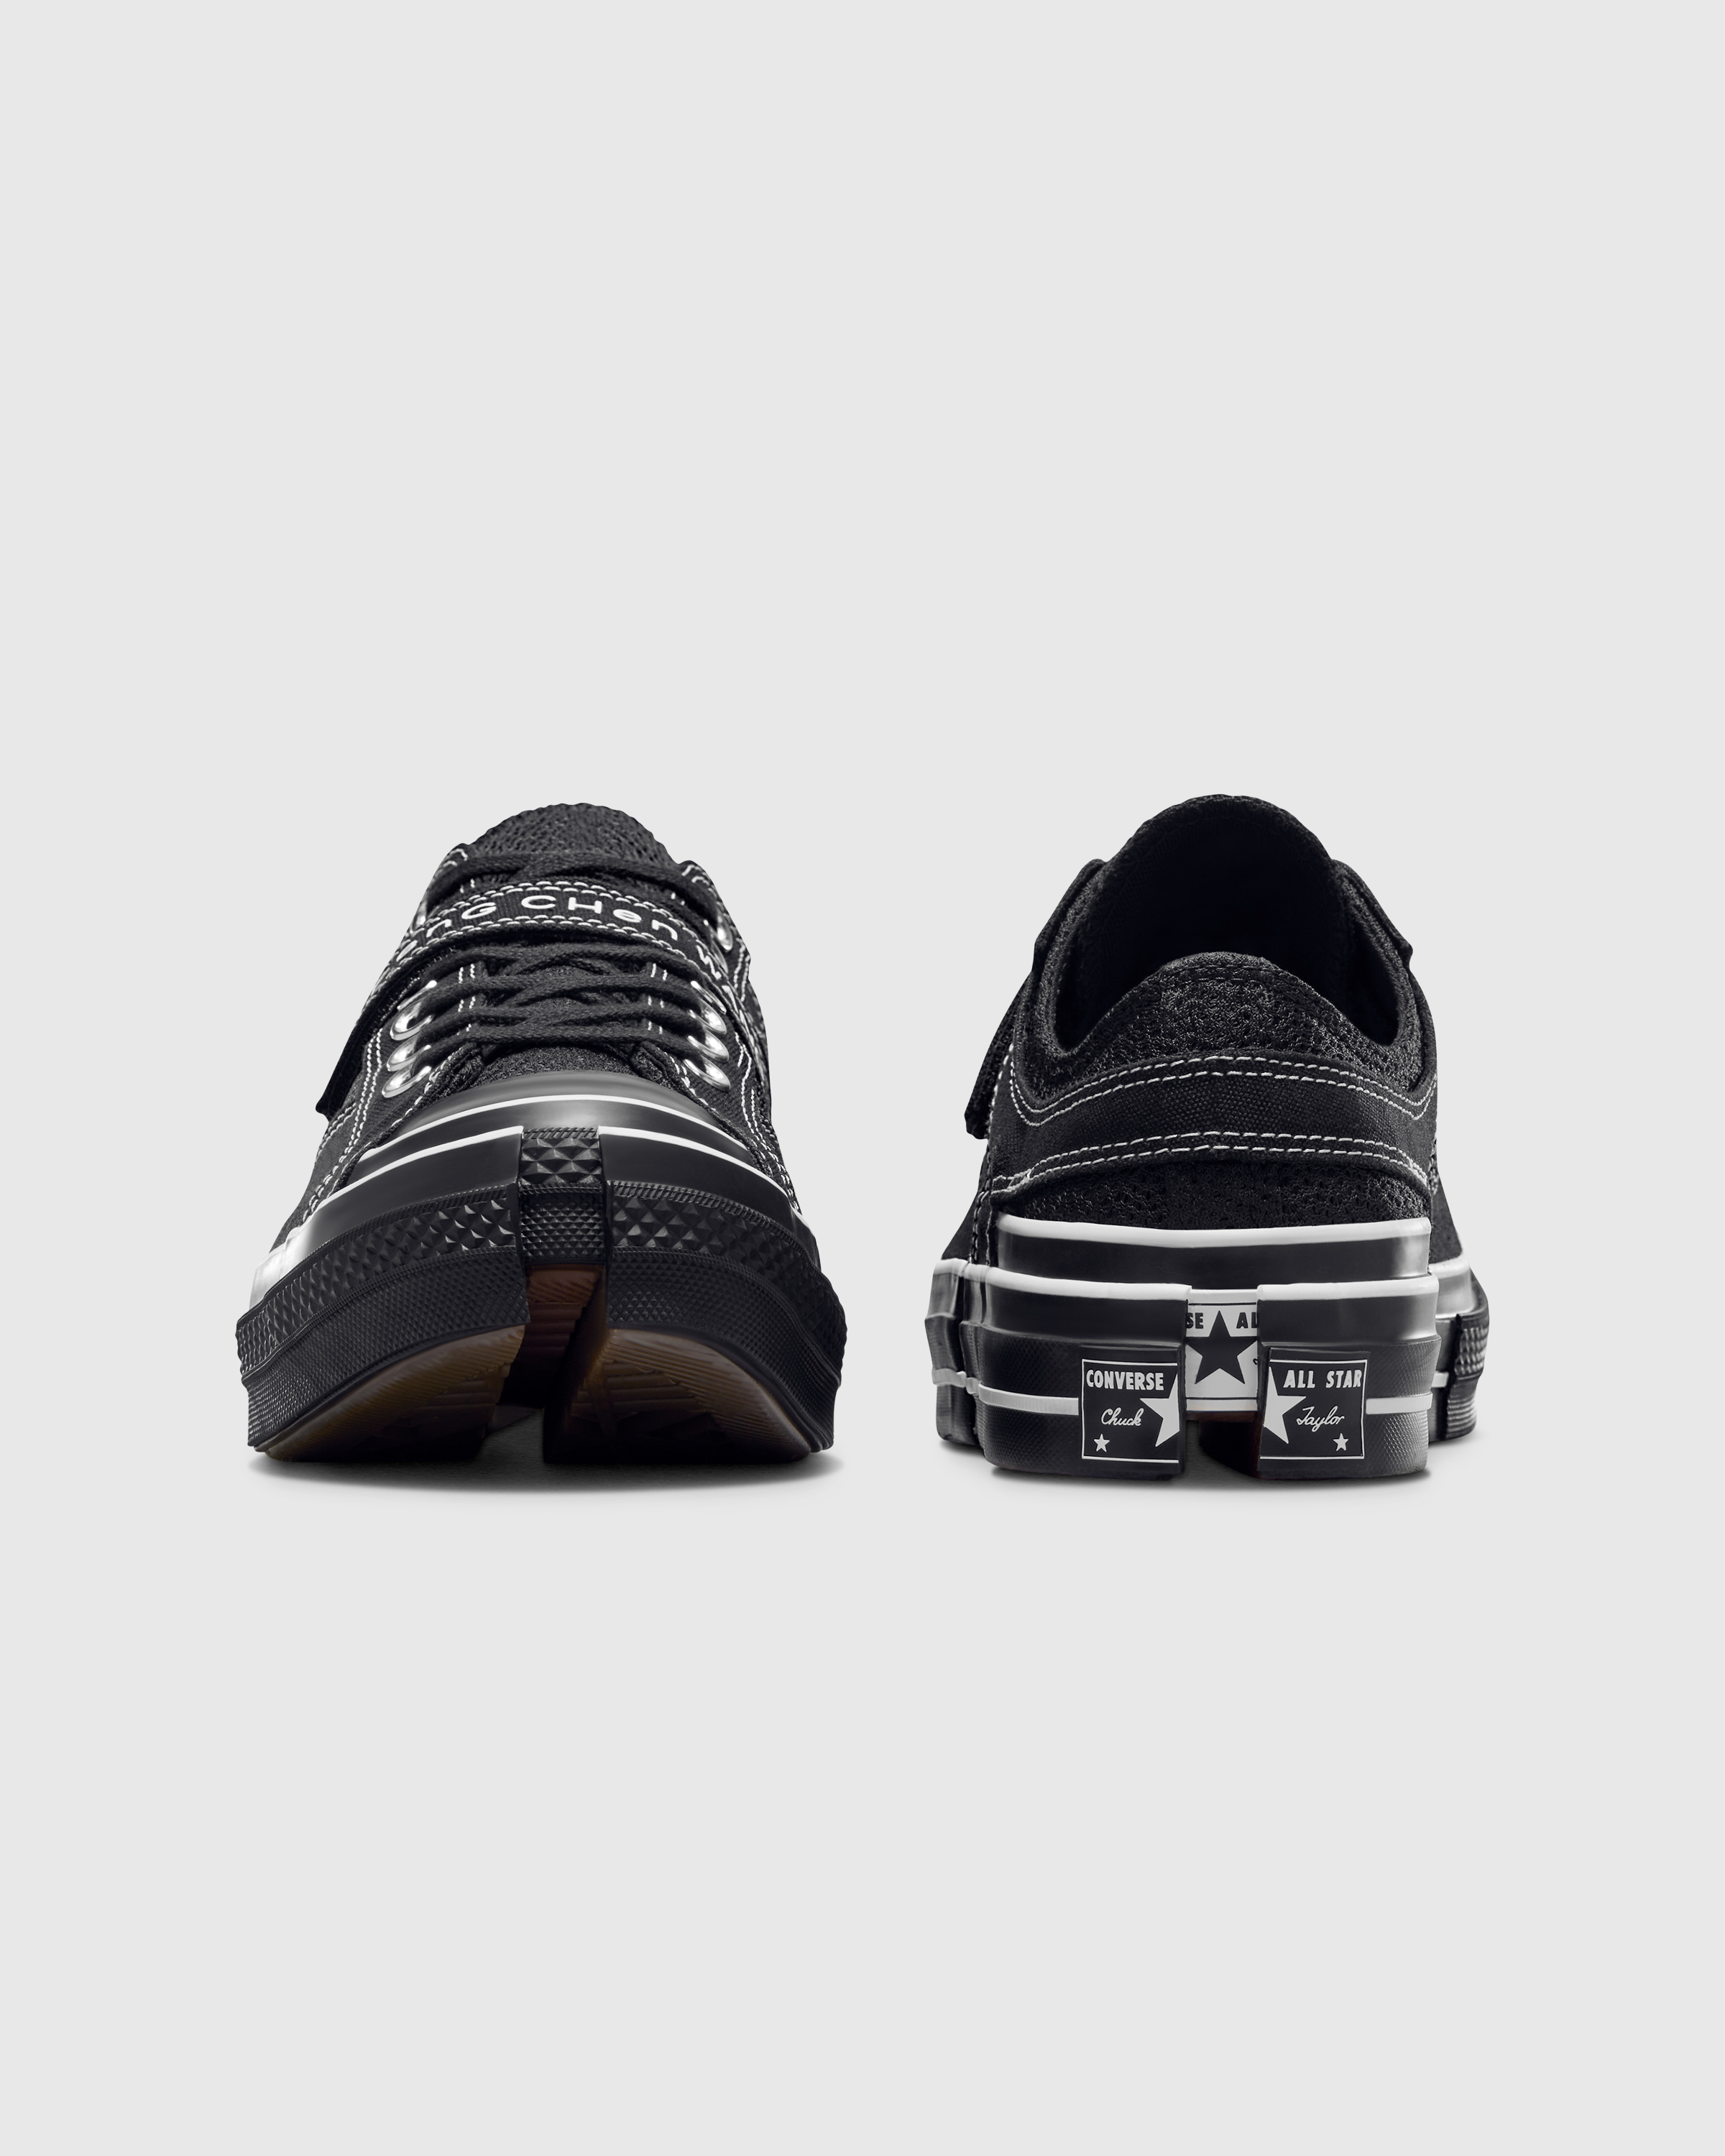 Feng Chen Wang x Converse – 2-in-1 Chuck 70 Black/Egret/Black - Low Top Sneakers - Black - Image 4